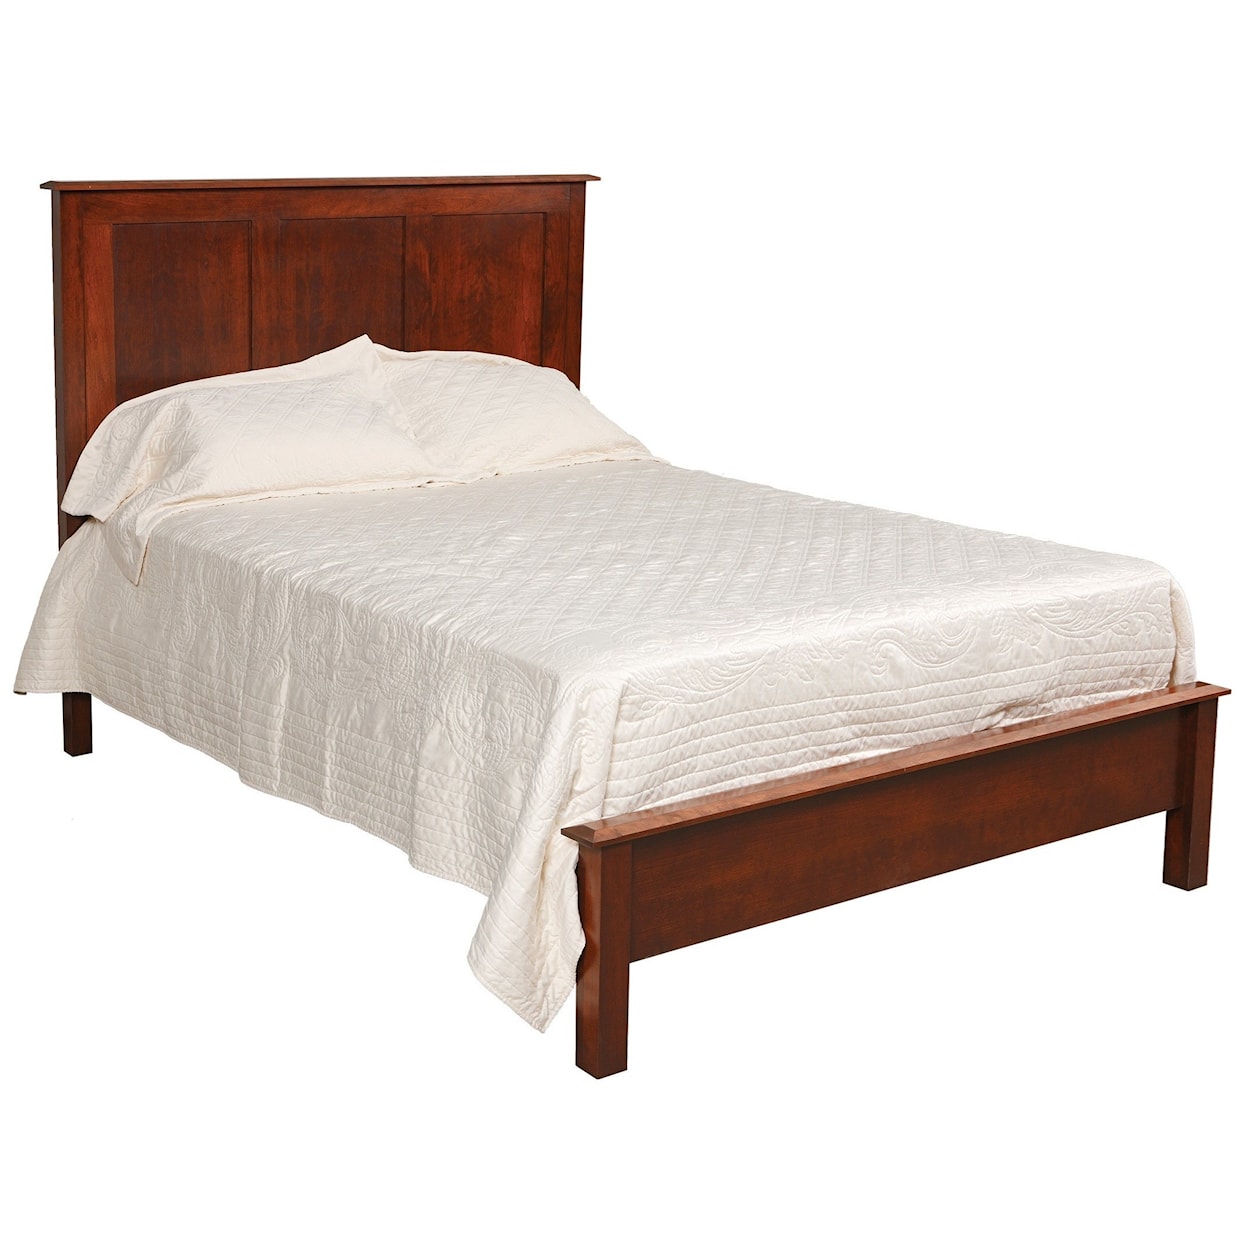 Daniels Amish Manchester Solid Wood King Bed